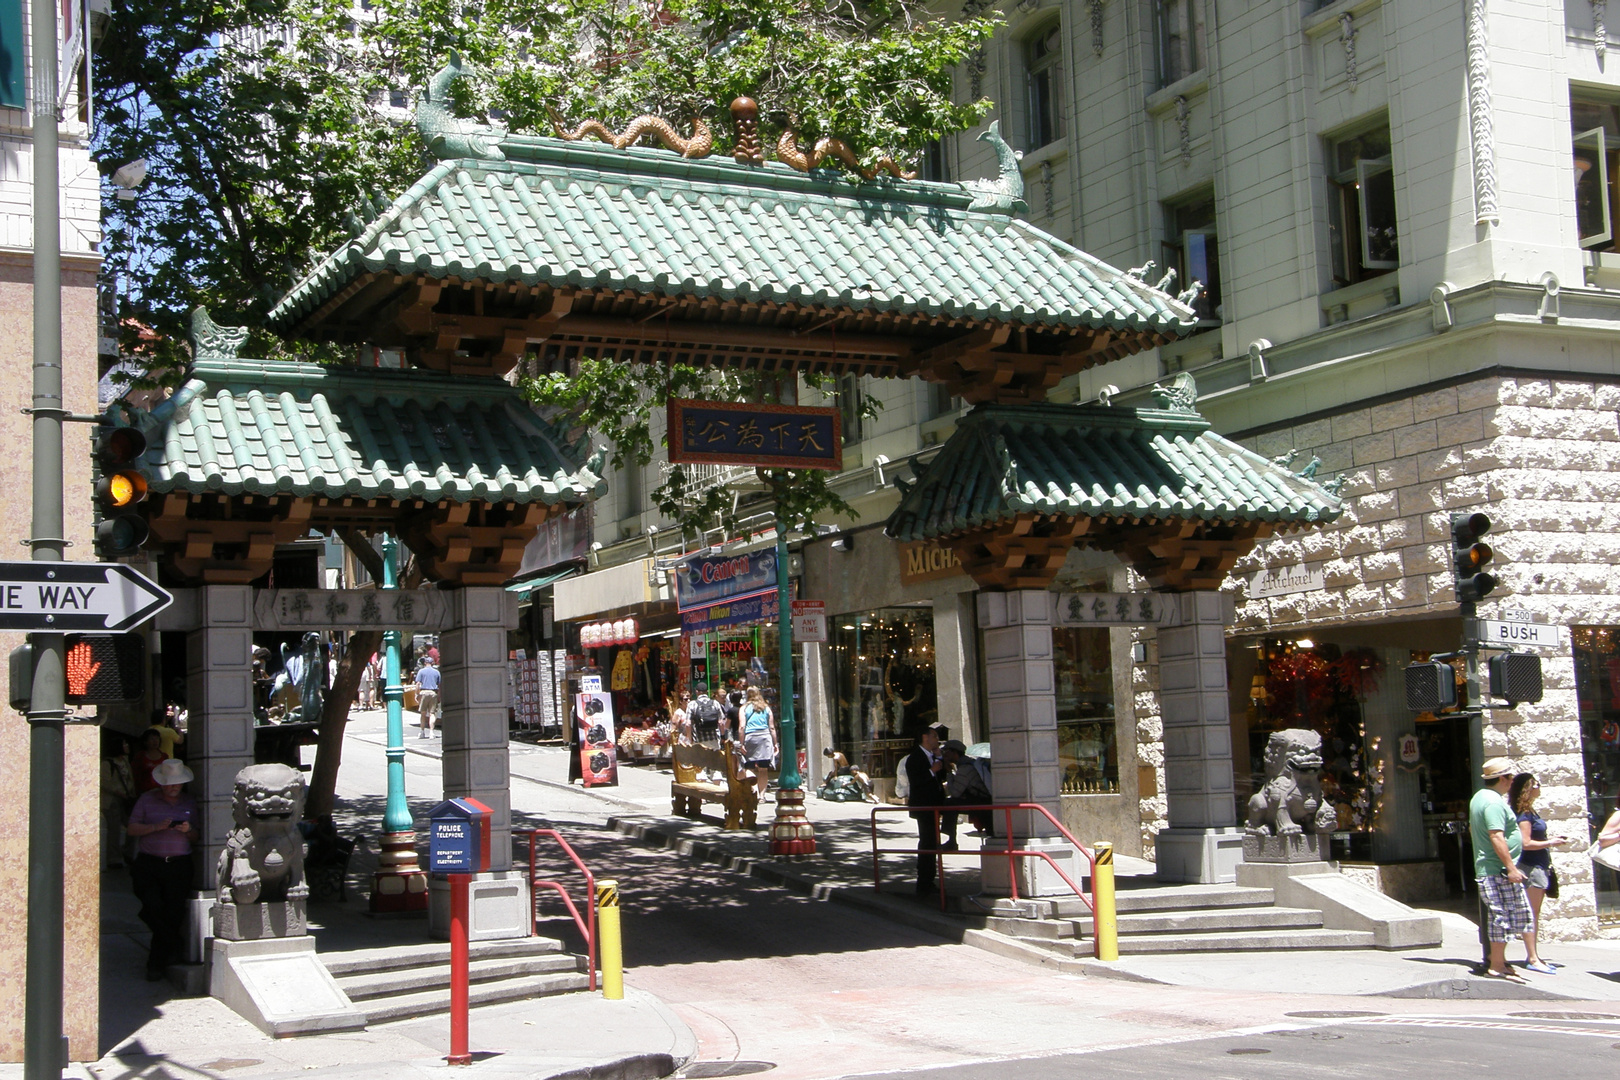 San Francisco: we enter into the Chinatown